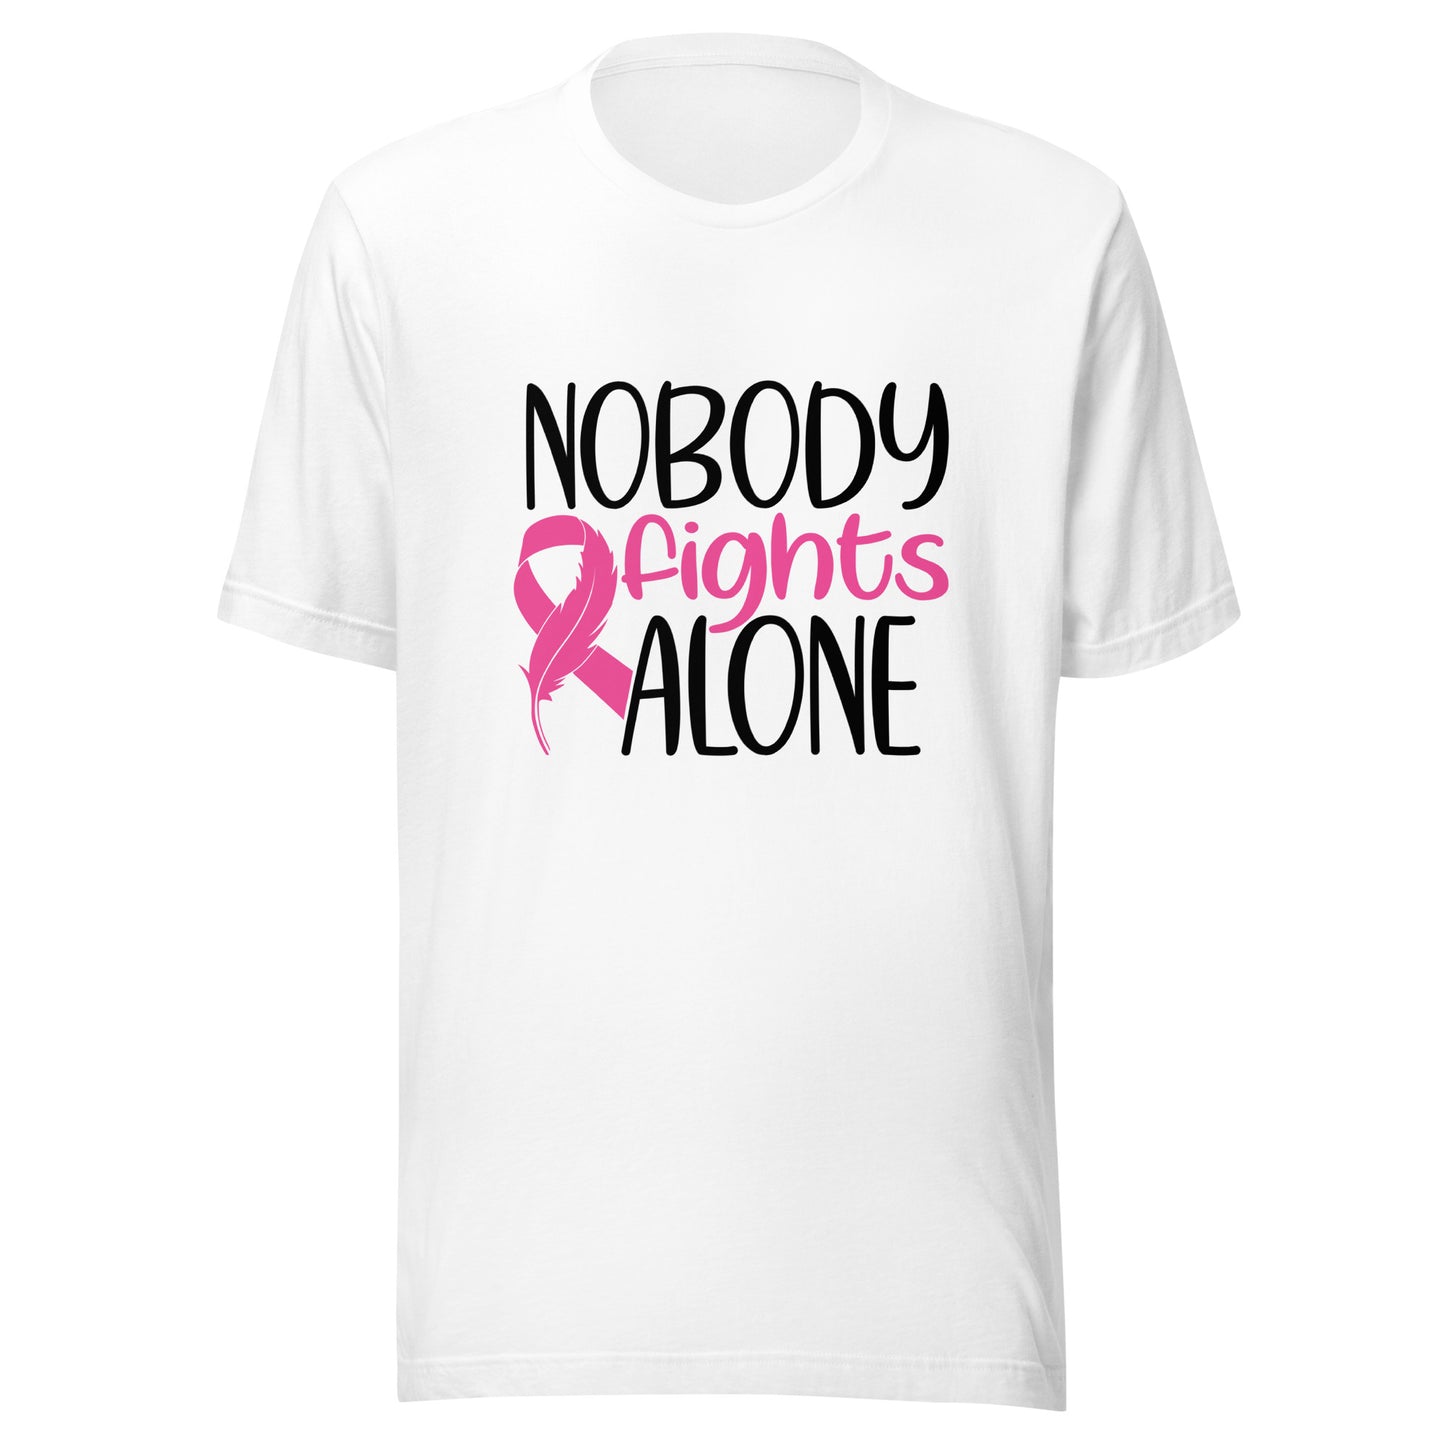 Nobody Fights Alone - Breast Cancer Awareness Pink Cancer Ribbon Unisex T-shirt